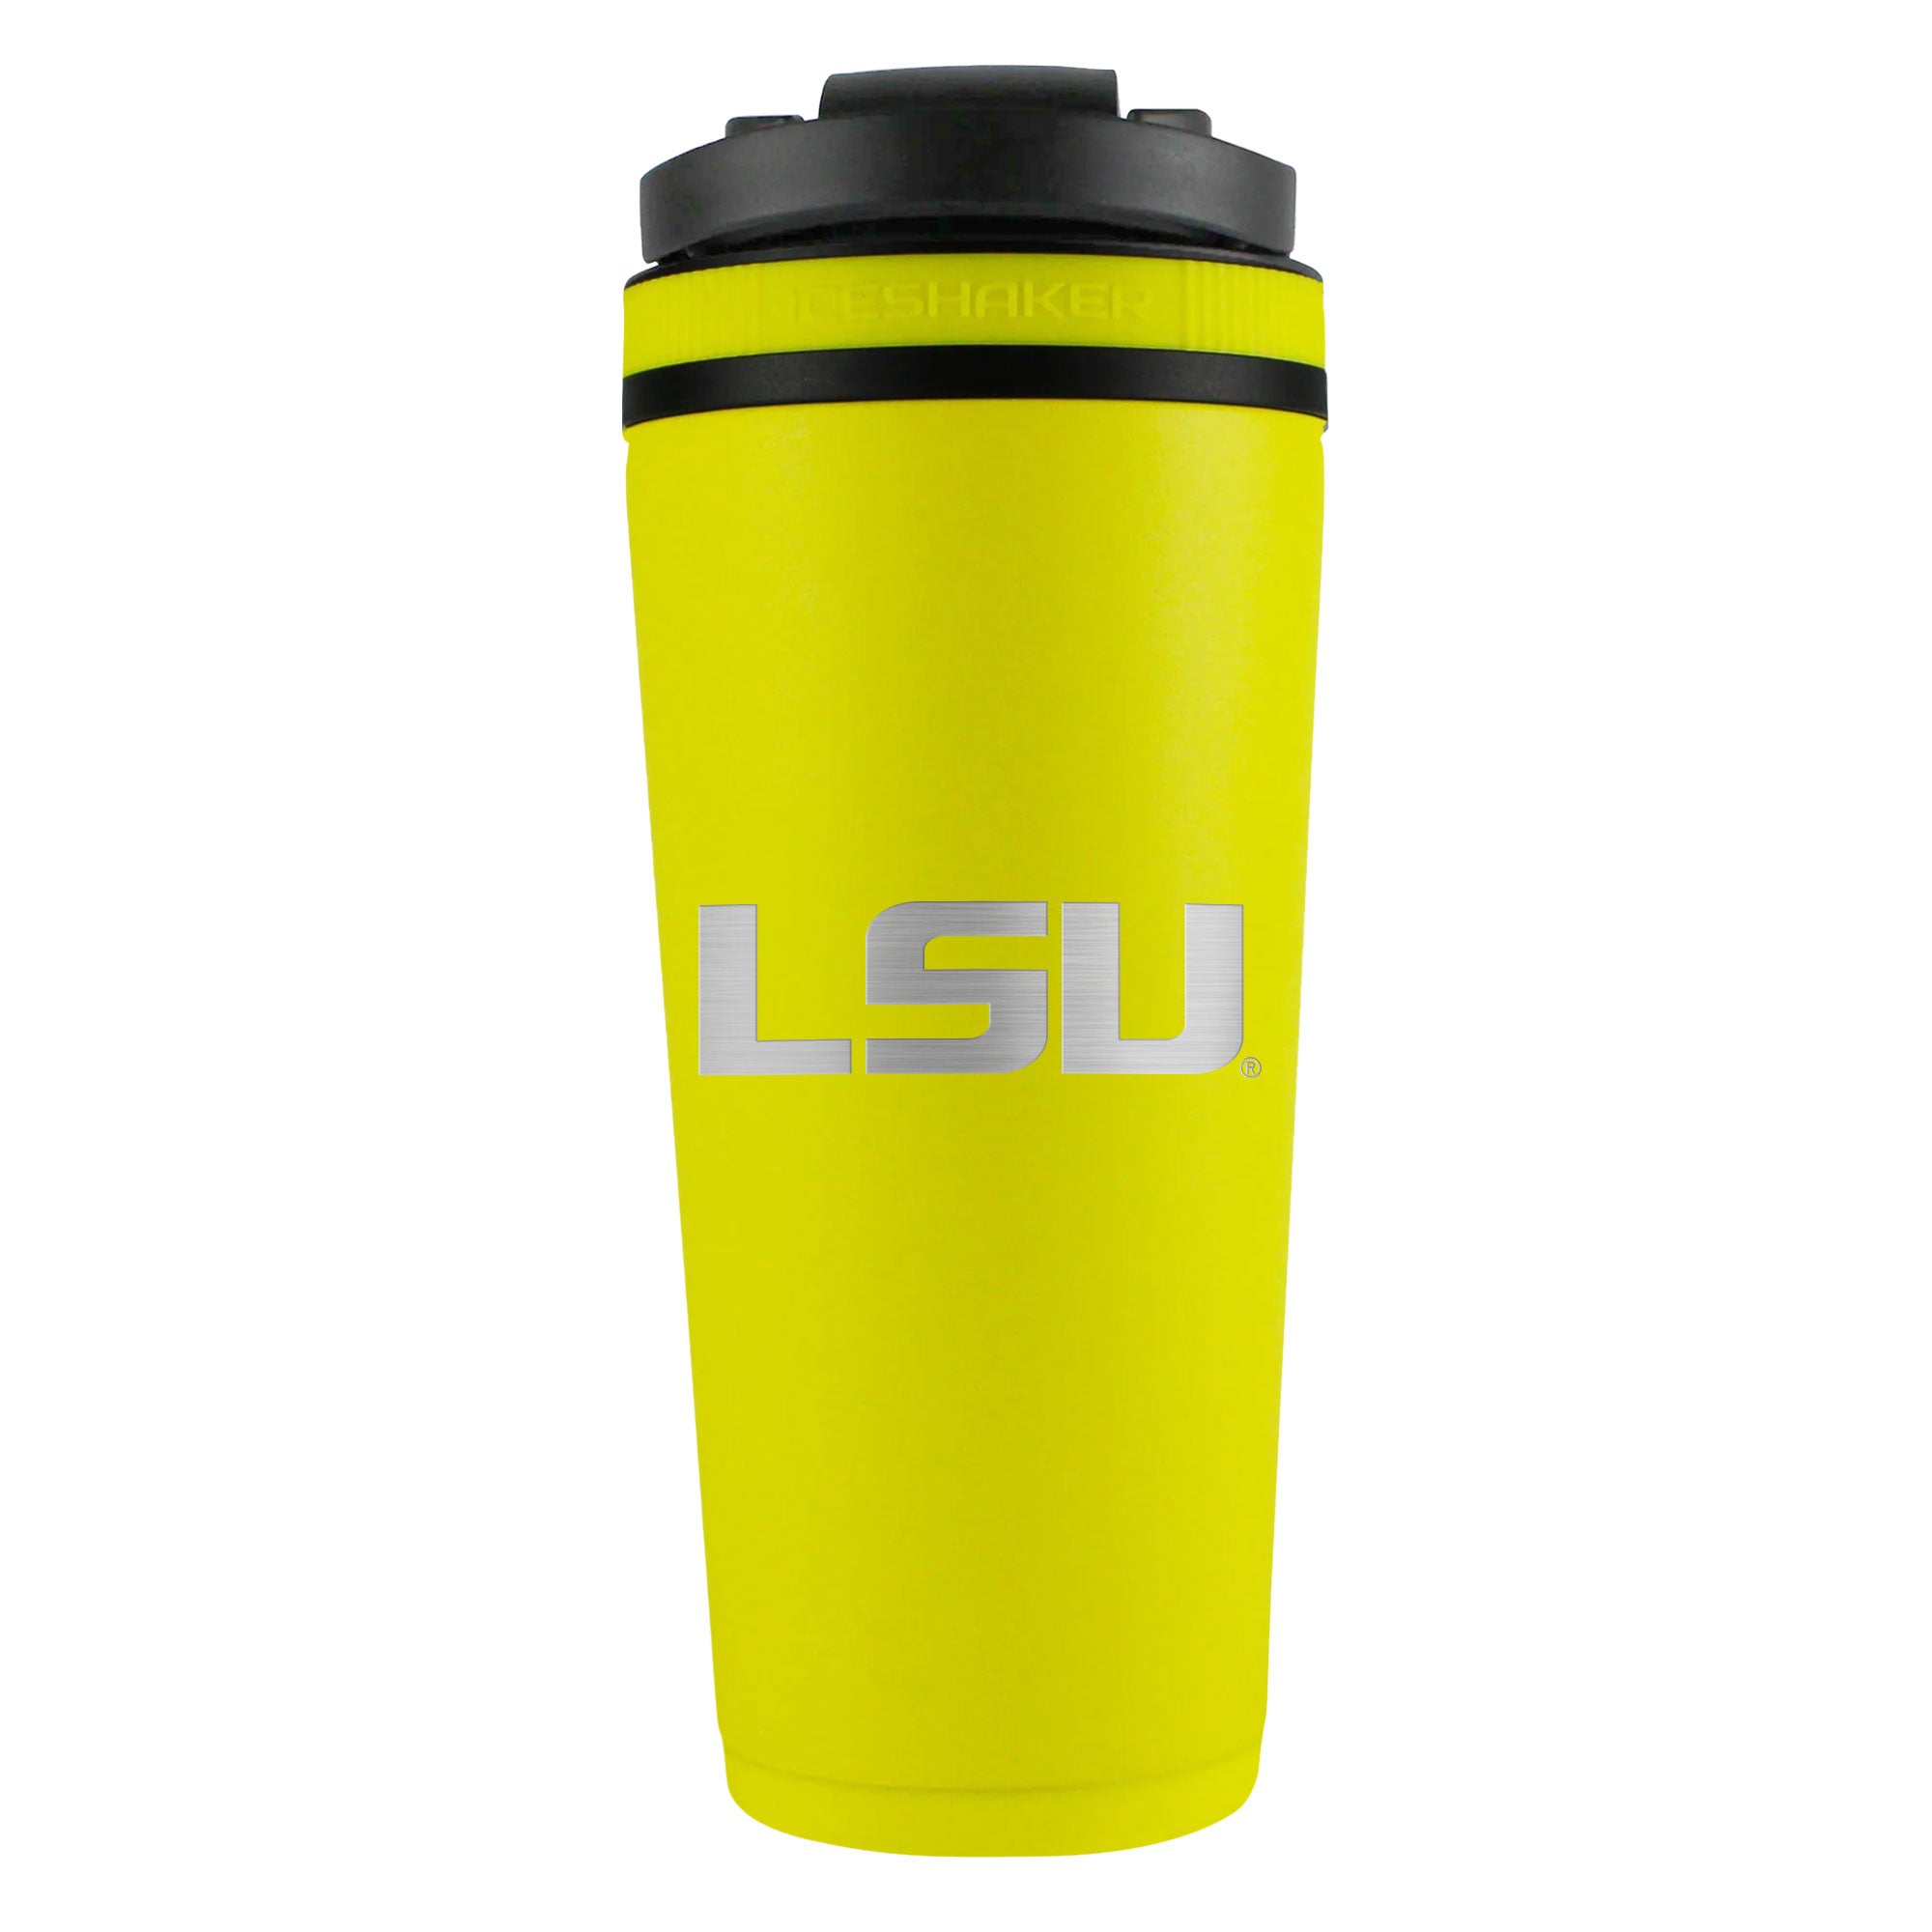 Officially Licensed Louisiana State University 26oz Ice Shaker - Yellow